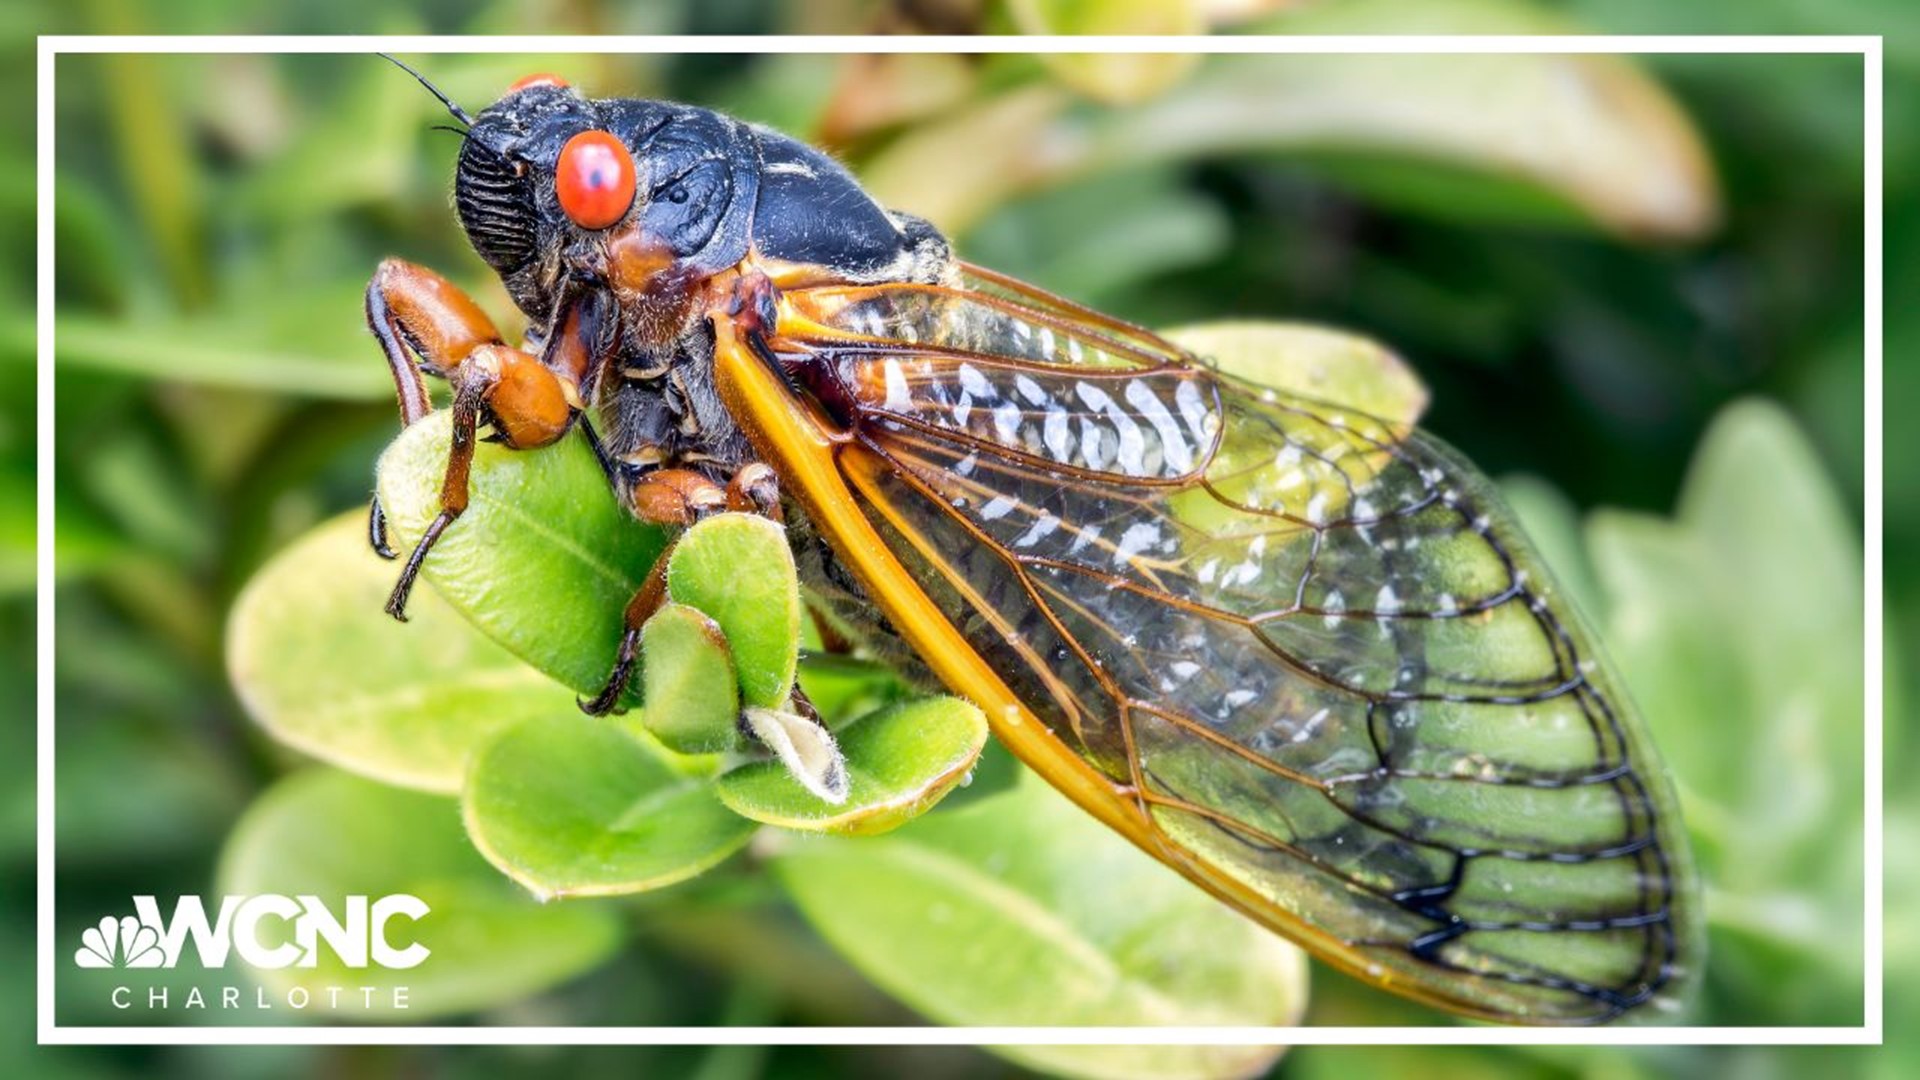 Billions of cicadas expected in 2024 due to a rare 'doublebrood' event